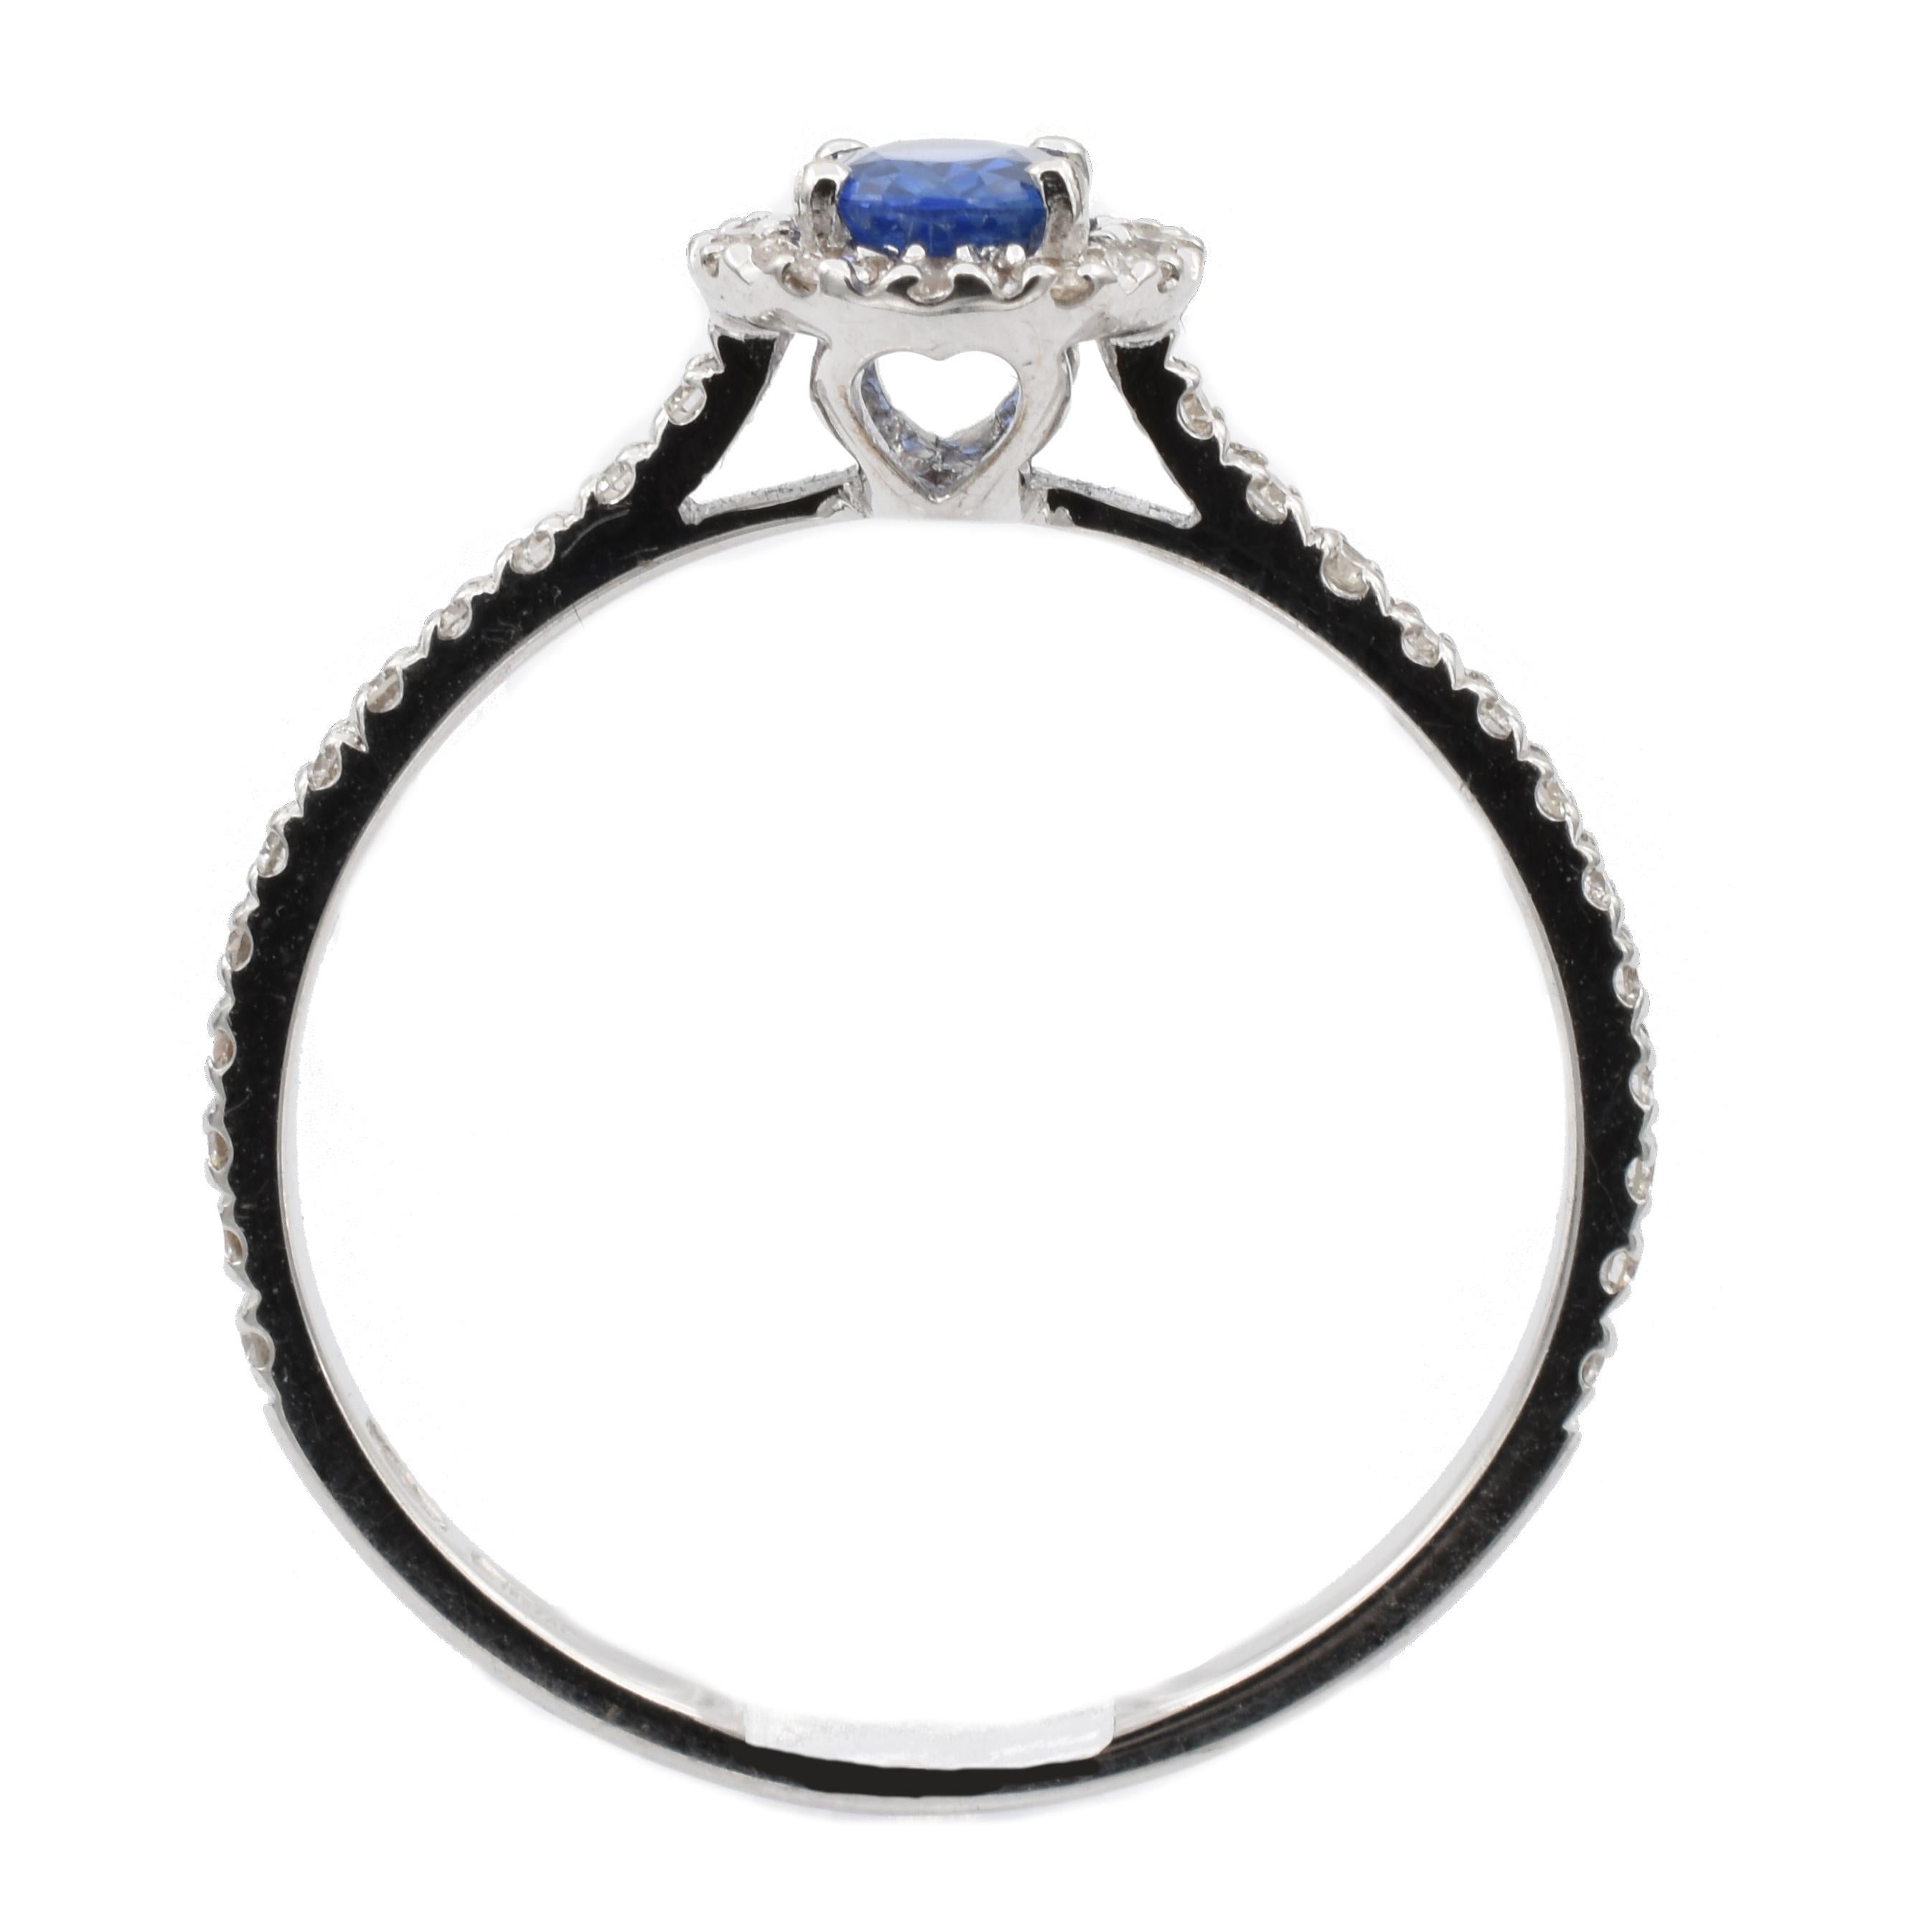 Contemporary Gilberto Cassola Oval Sapphire and Diamonds White Gold Ring Made in Italy For Sale